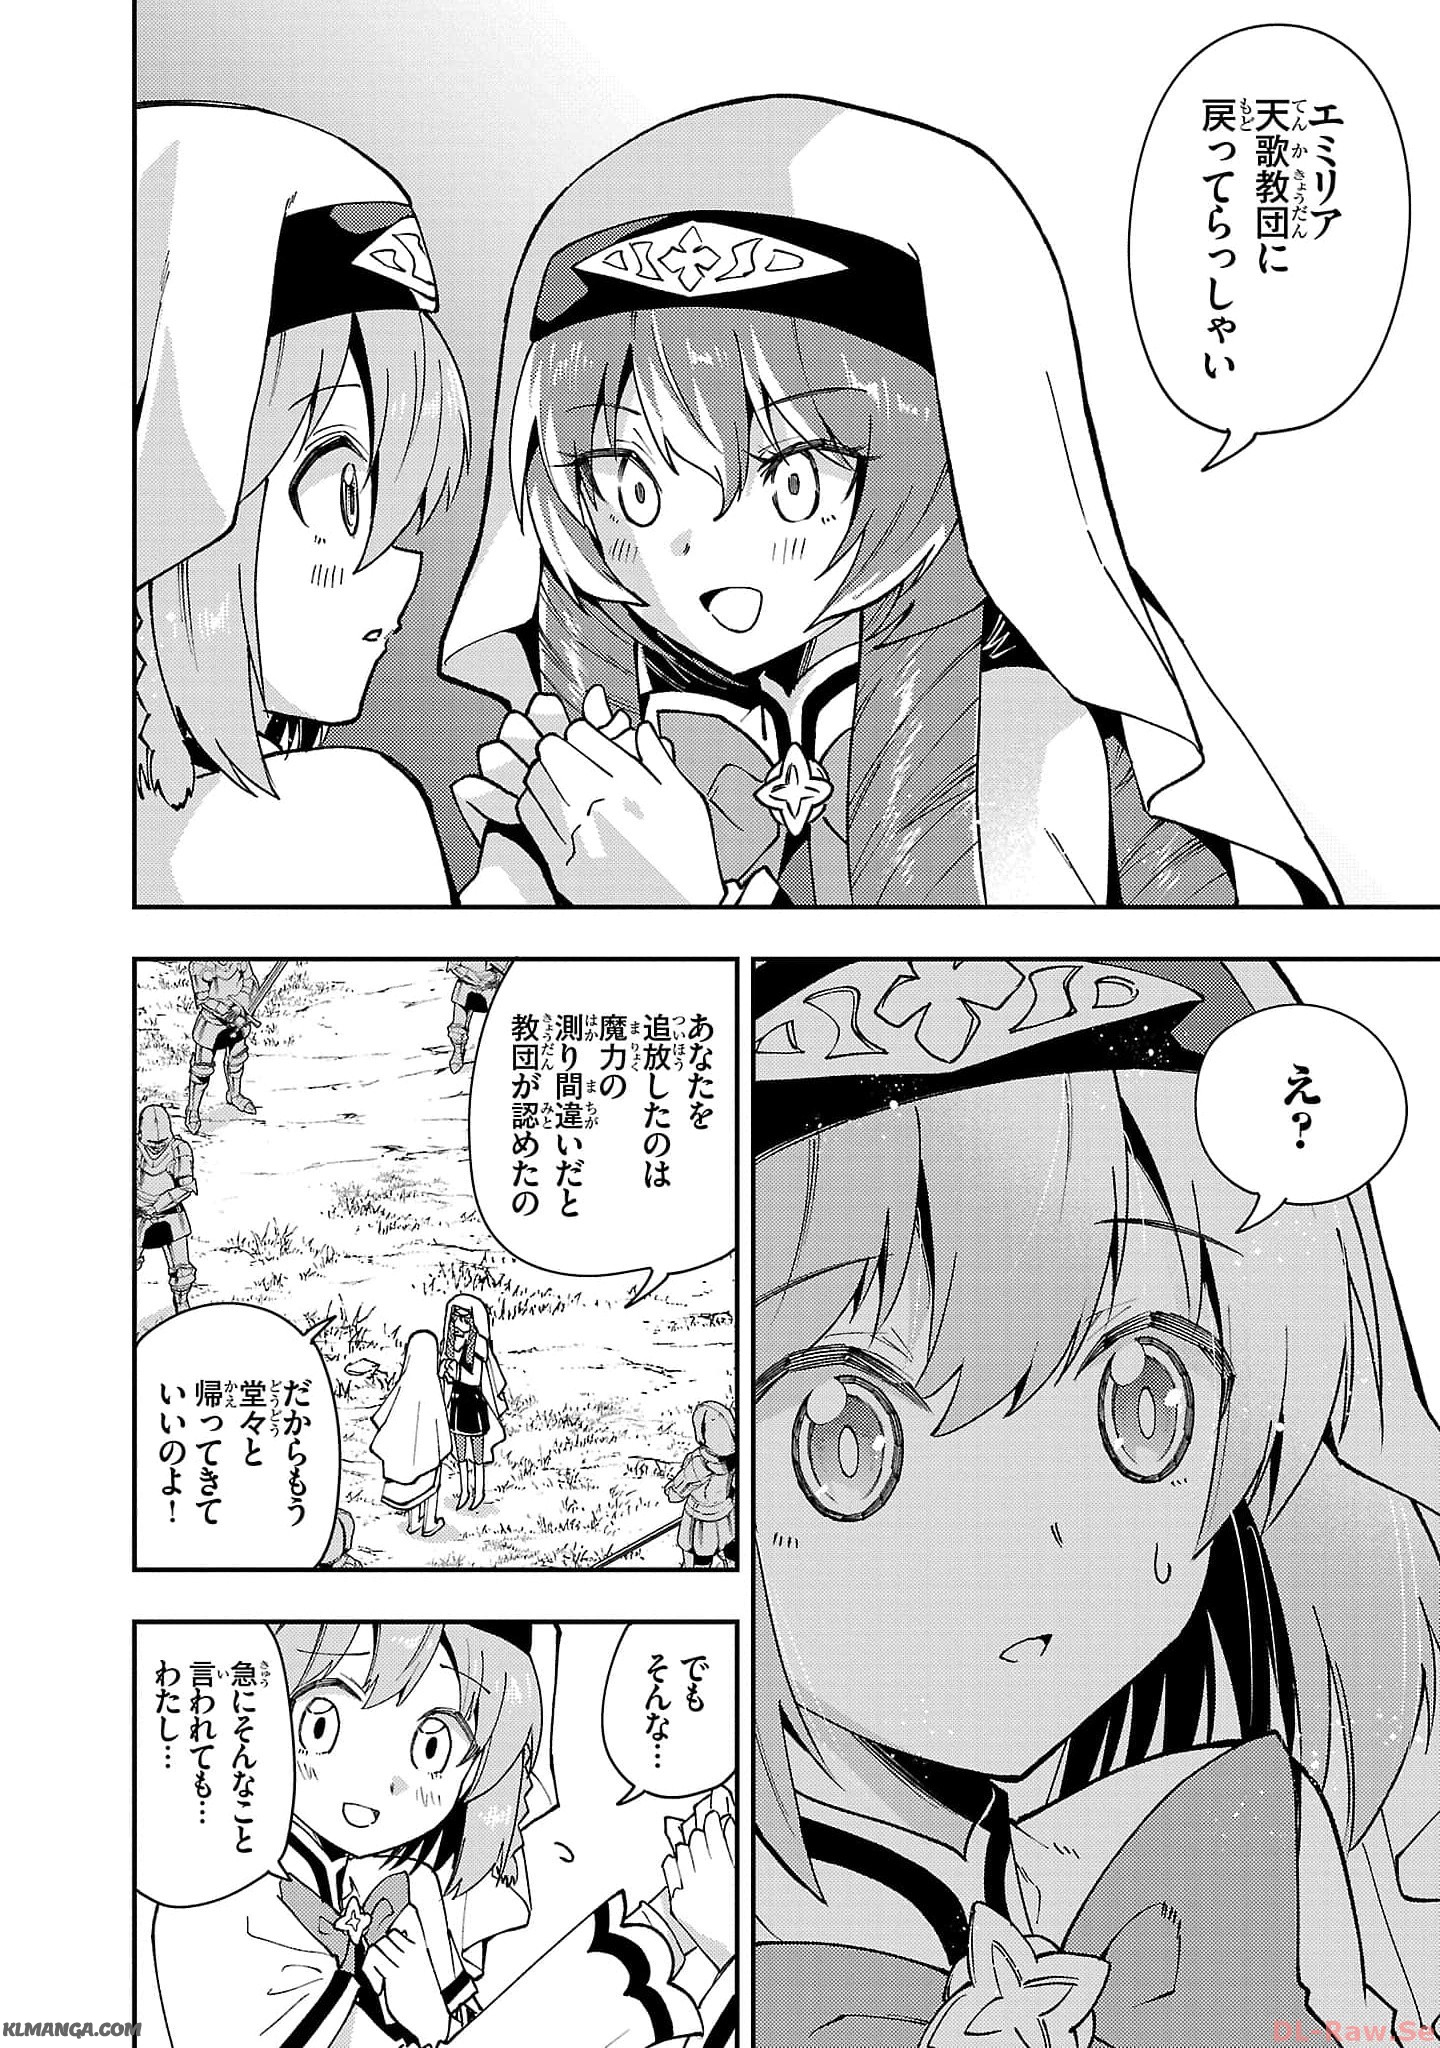 Hungry Saint and Full-Stomach Witch’s Slow Life in Another World! 腹ペコ聖女とまんぷく魔女の異世界スローライフ! 第21話 - Page 14